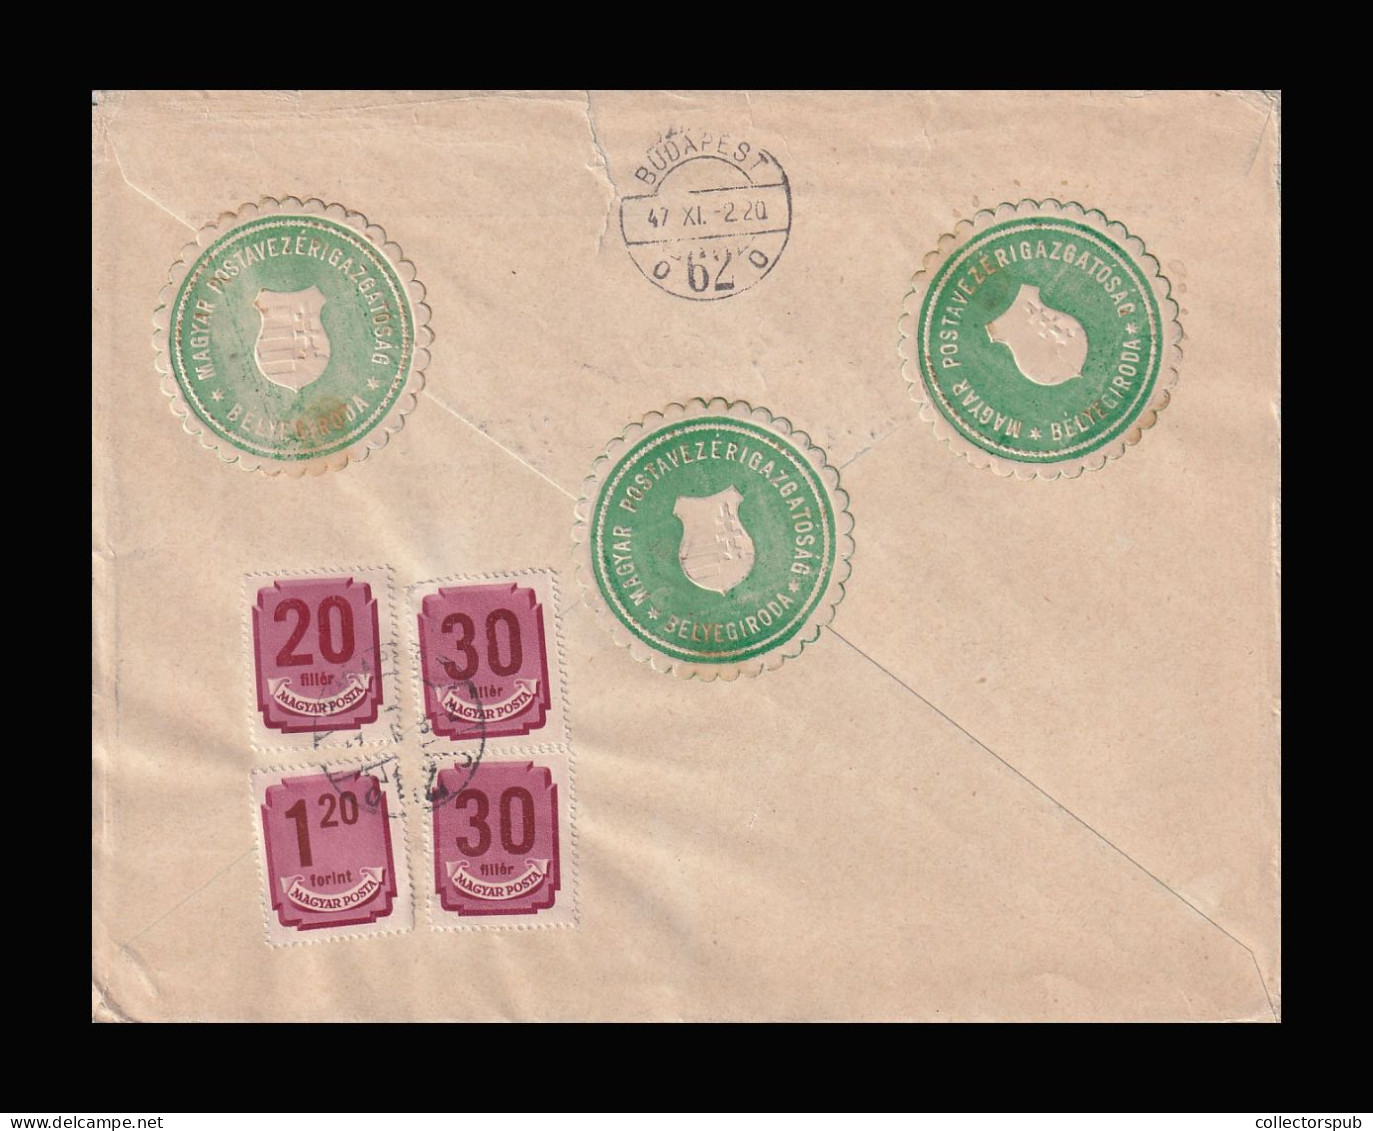 BUDAPEST 1947. Nice Registered Cover With Postage Due Stamps - Covers & Documents